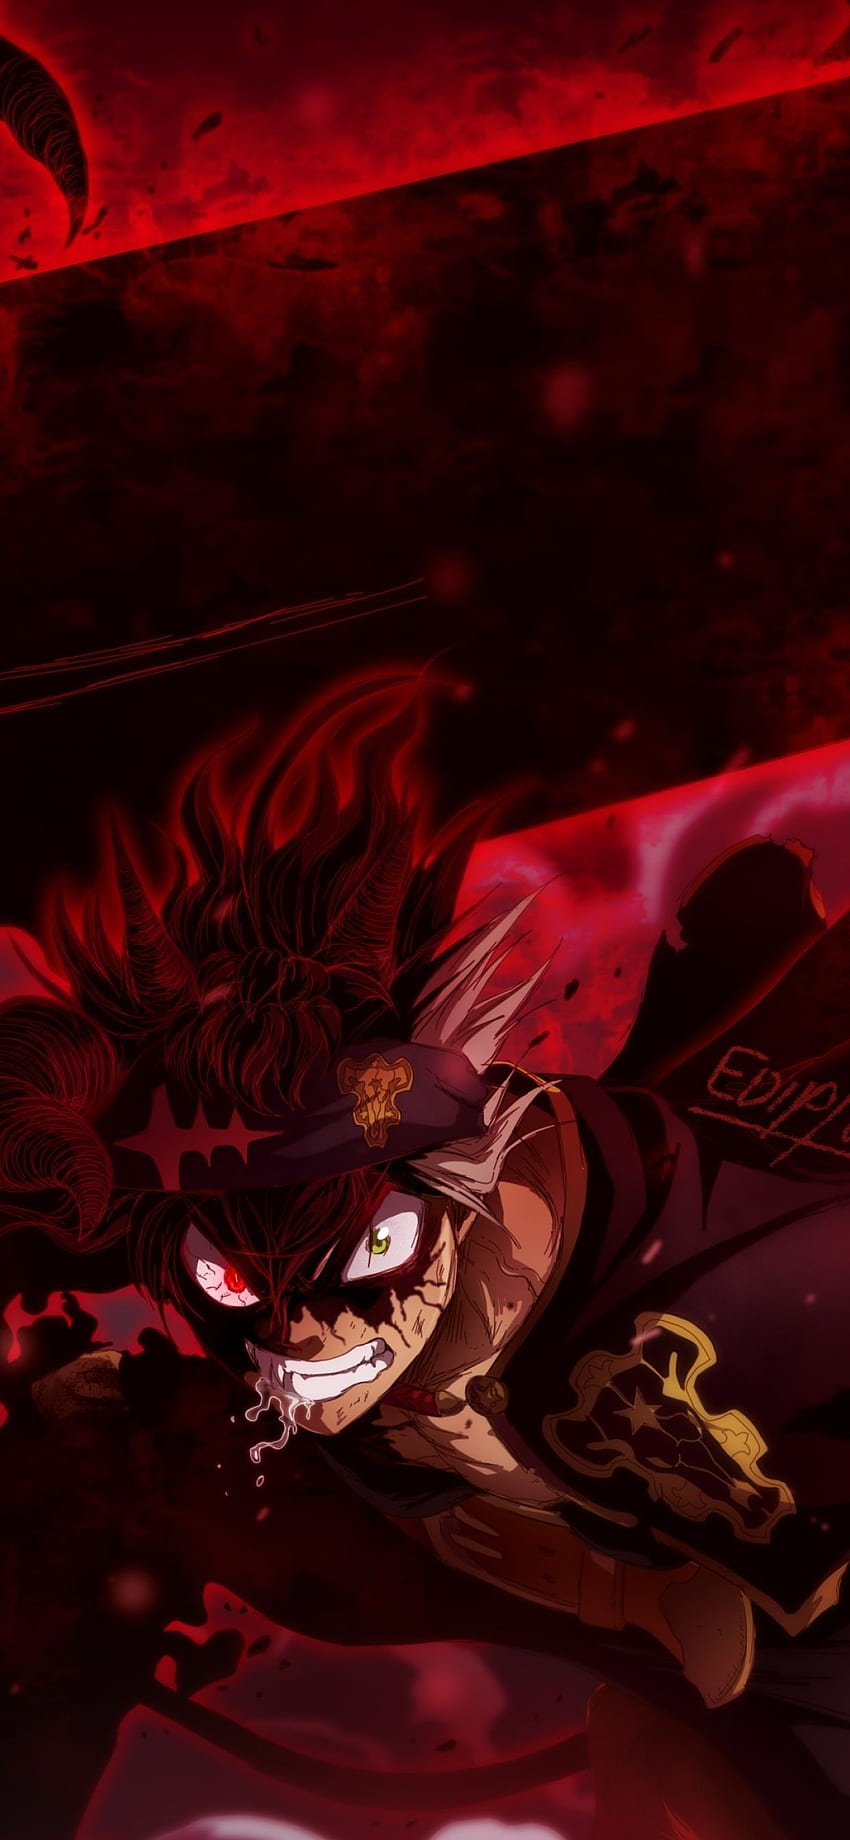 Asta in Black Clover iPhone XS MAX , Anime , , and Background in 2021. Black clover manga, Black clover anime, anime, Black Clover Android HD phone wallpaper